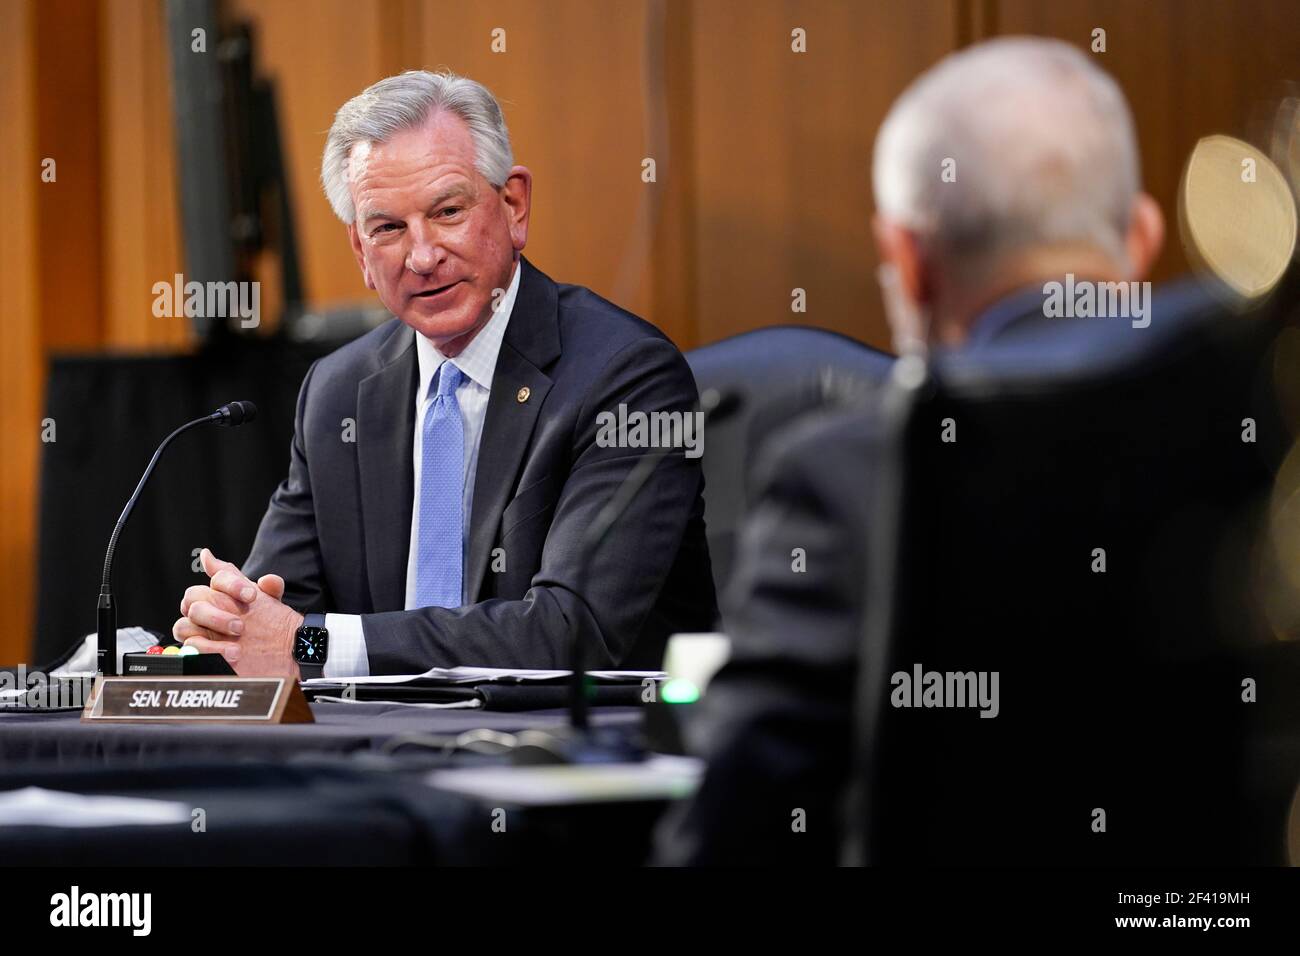 Washington, USA. 18th Mar, 2021. Sen. Tommy Tuberville, R-Ala., speaks during a Senate Health, Education, Labor and Pensions Committee hearing on the federal coronavirus response on Capitol Hill in Washington, Thursday, March 18, 2021. (Photo by Susan Walsh/Pool/Sipa USA) Credit: Sipa USA/Alamy Live News Stock Photo